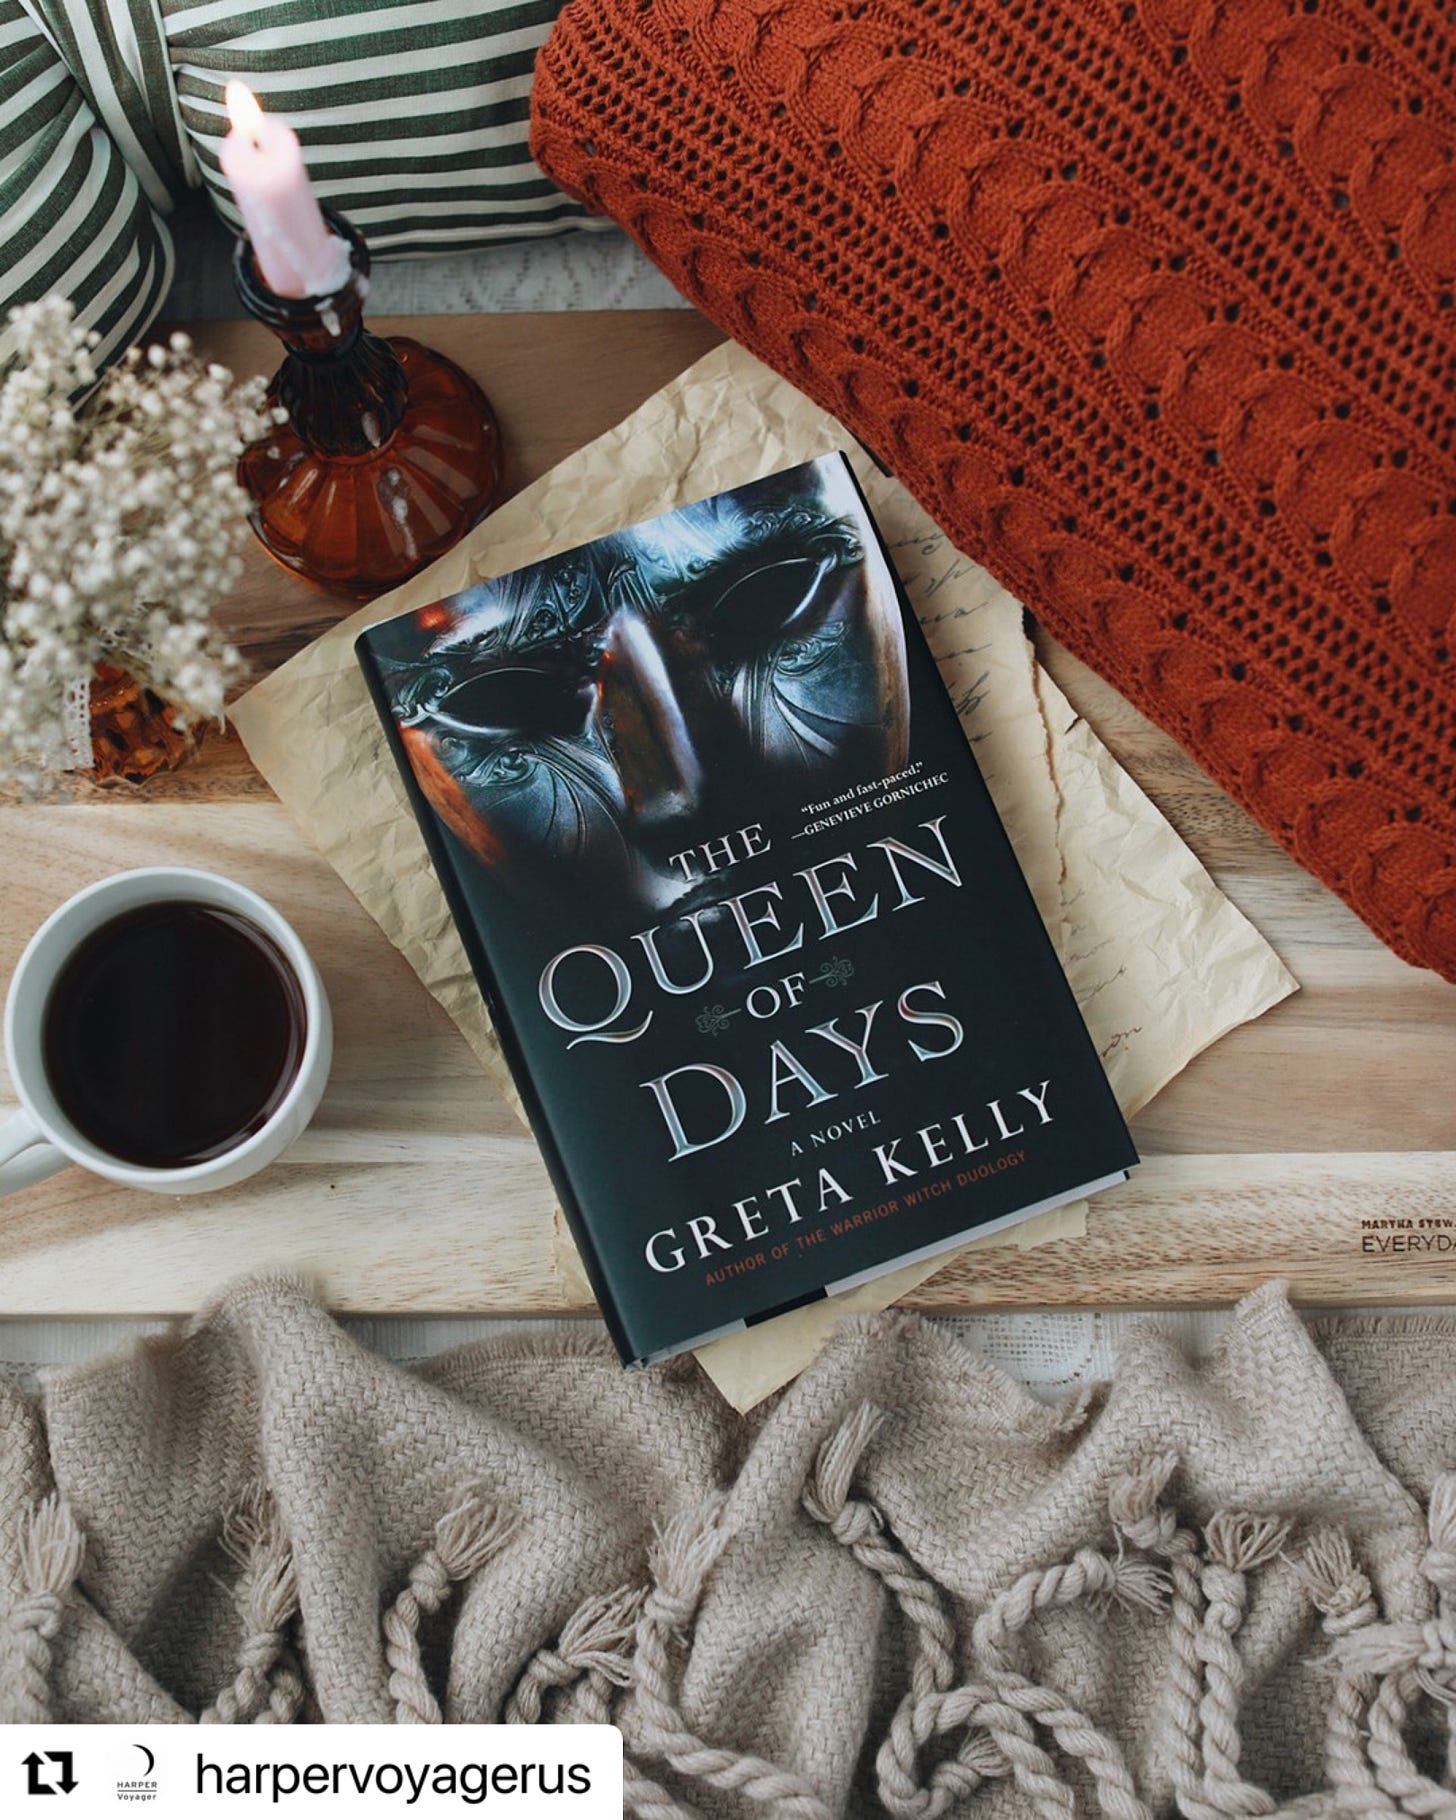 A picture of a black book with a silver mask on the cover and the title The Queen of Days. The Book is sitting on a wooden table beside a cup of coffee, a candle and brown and orange blankets